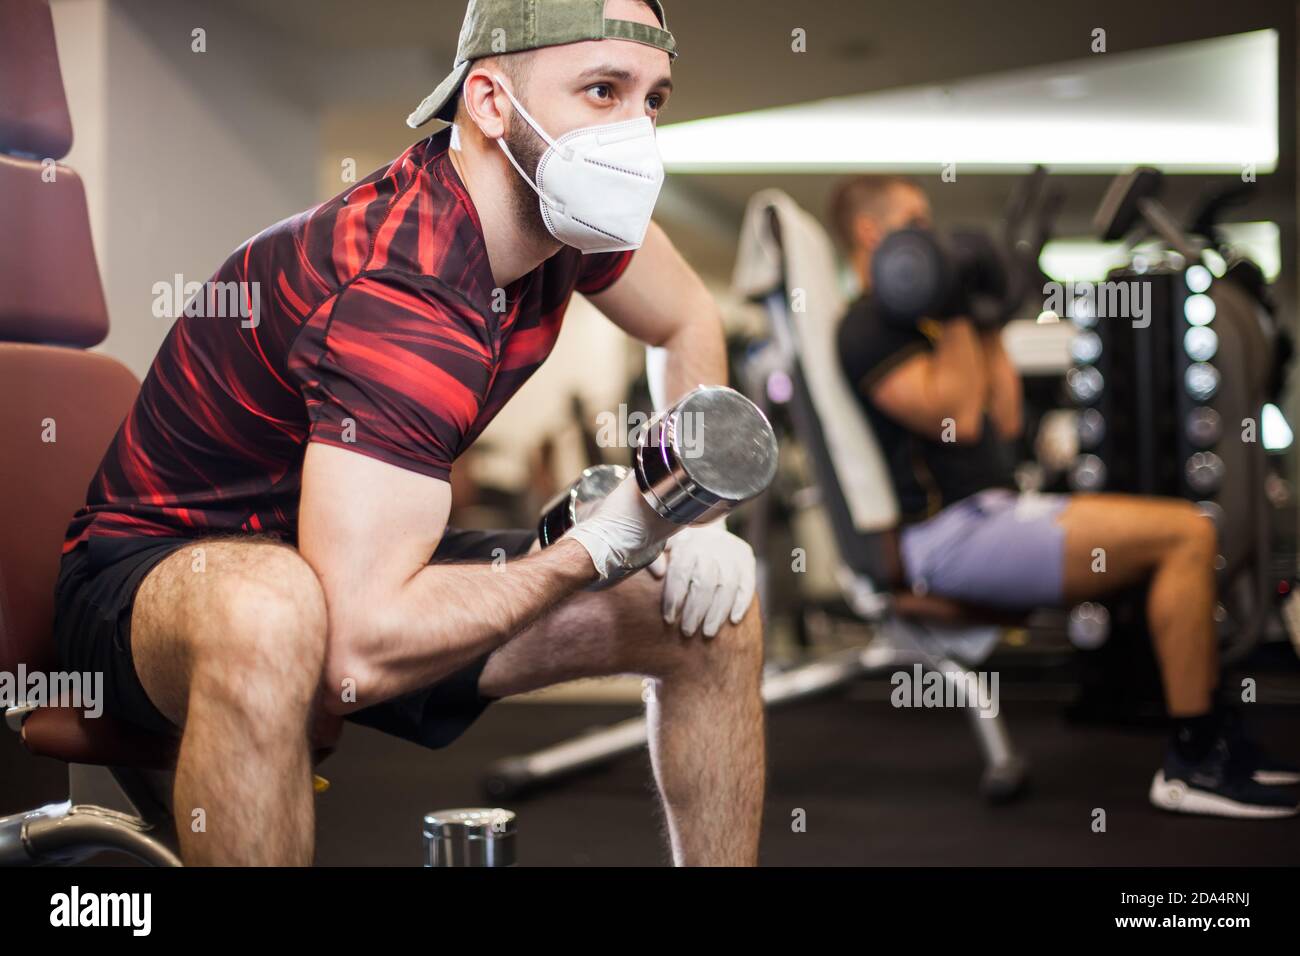 Young men working out wearing face mask & latex rubber gloves,performing bicep curl with dumbbells,COVID-19 pandemic social distancing rules Stock Photo